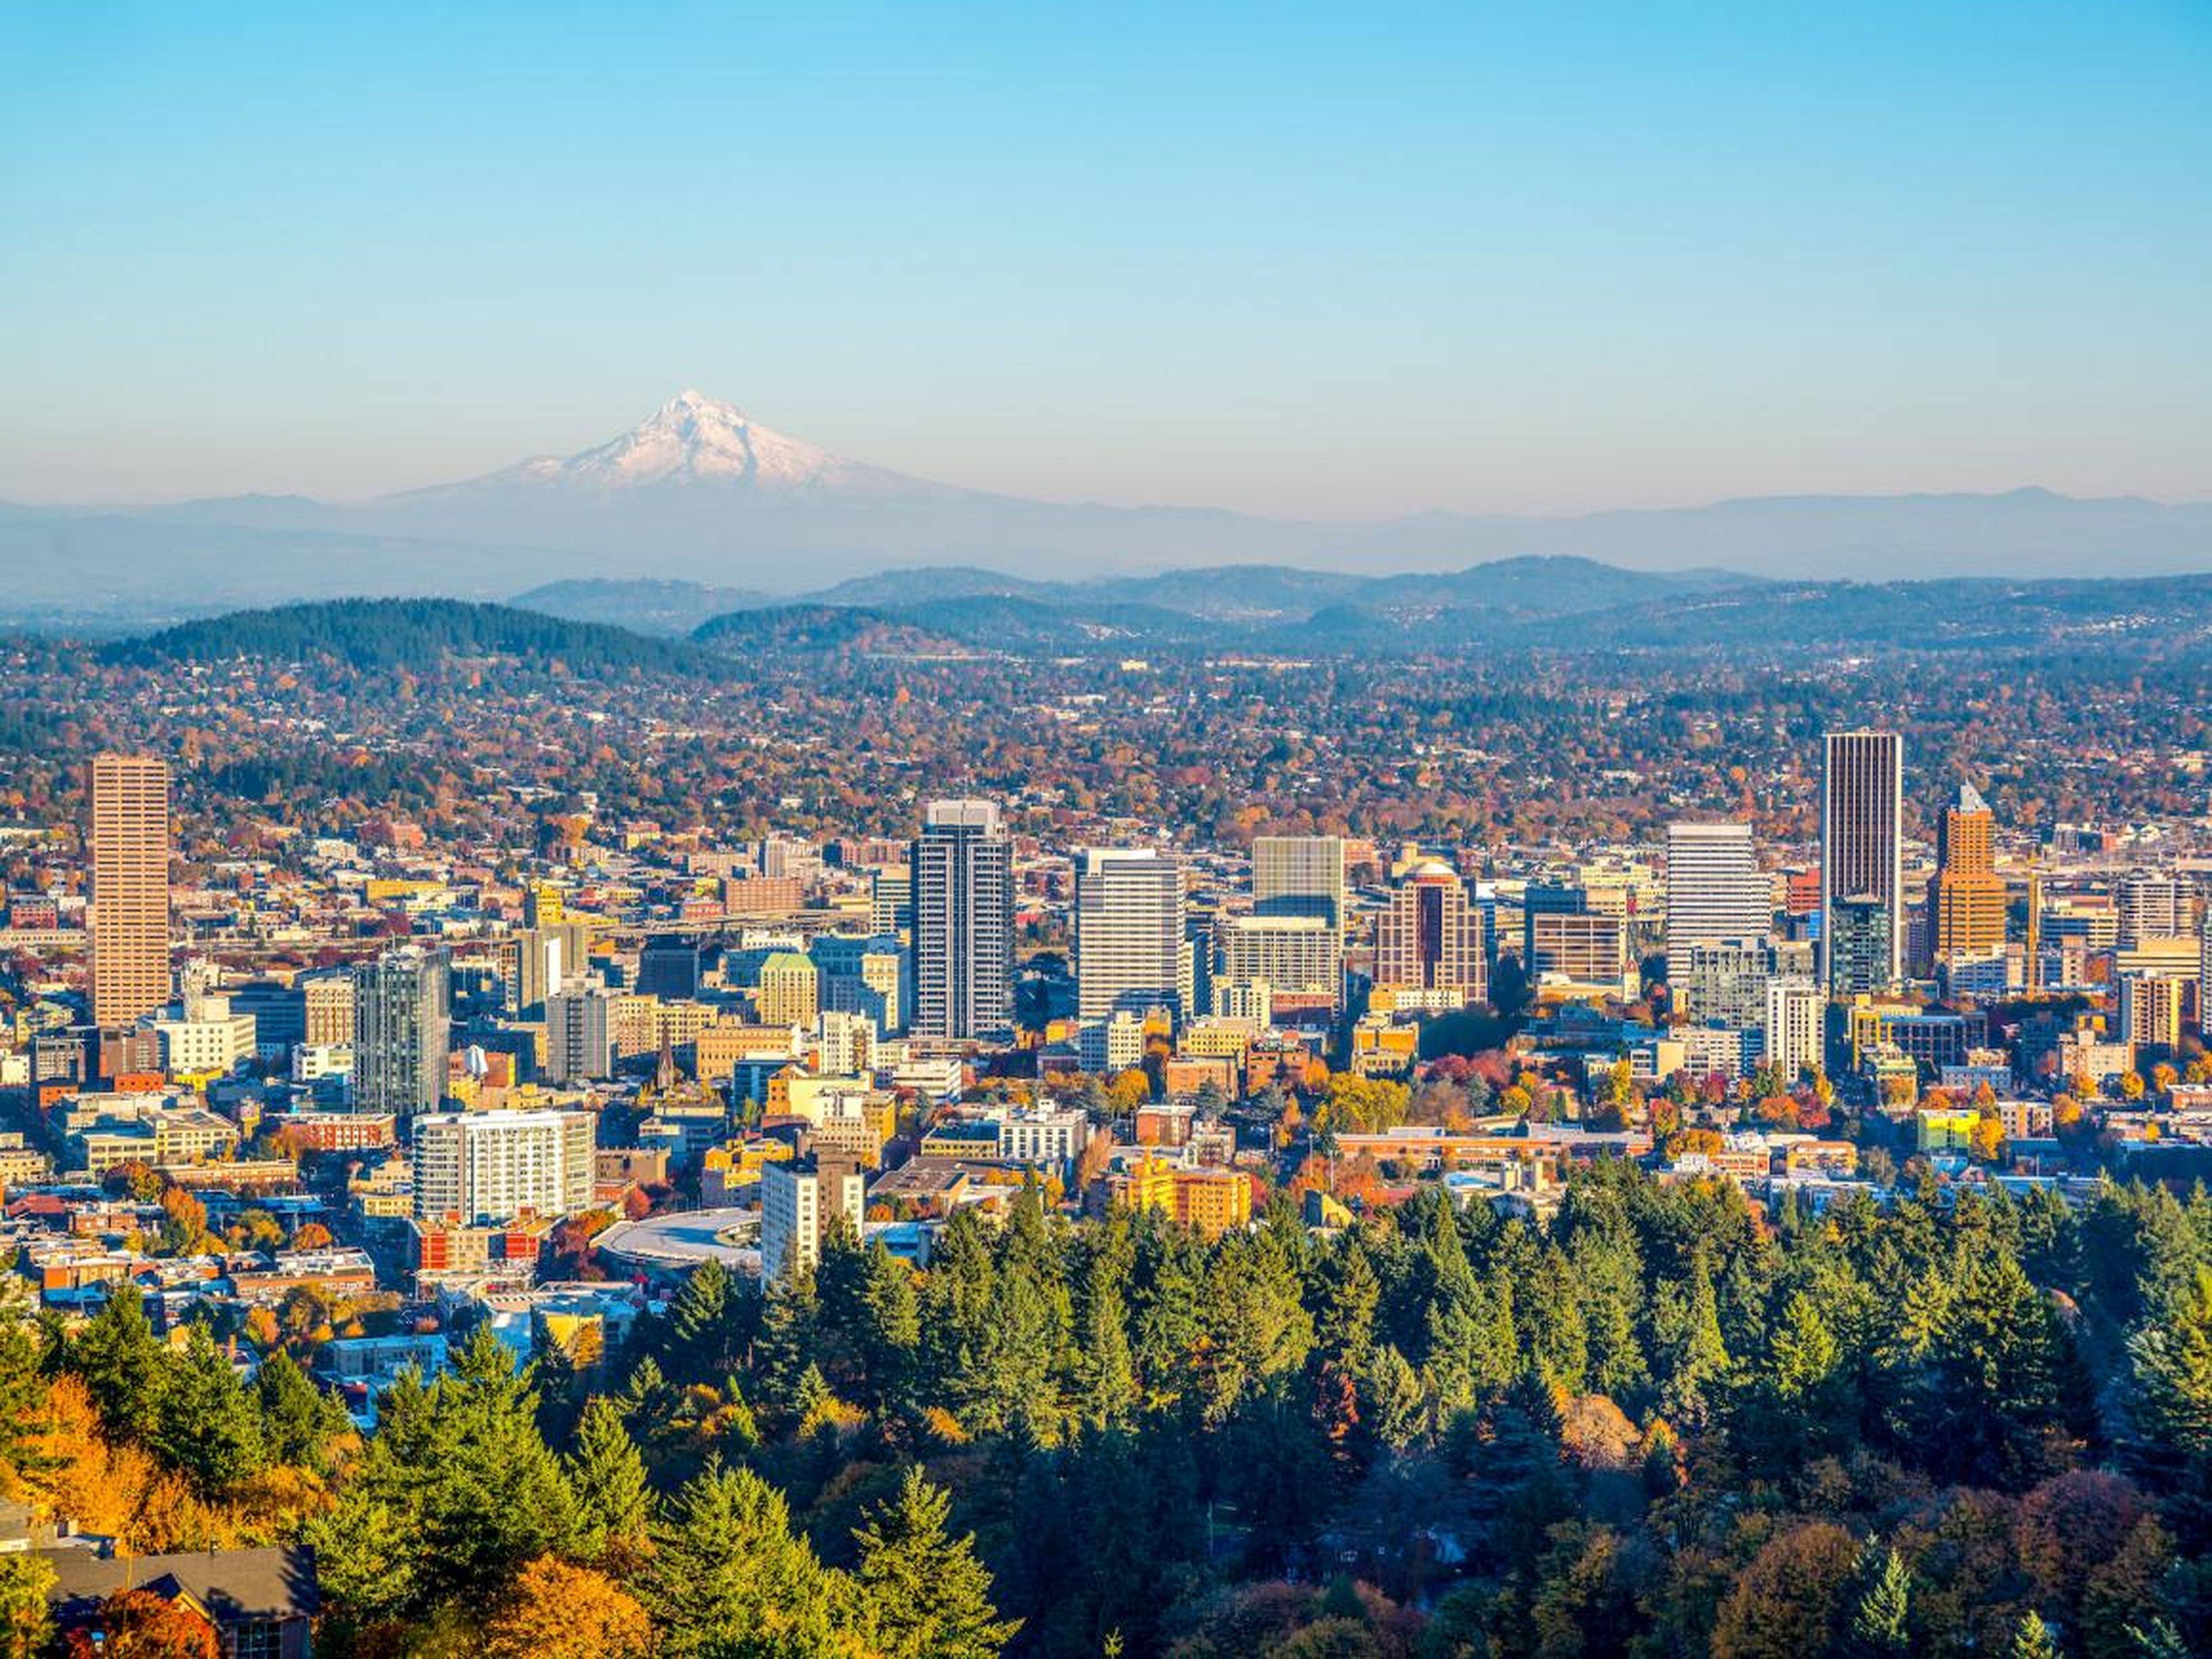 Meanwhile, if you venture further up the Pacific Coast from San Francisco, the median rent for a one-bedroom apartment in Portland is $1,595 a month.